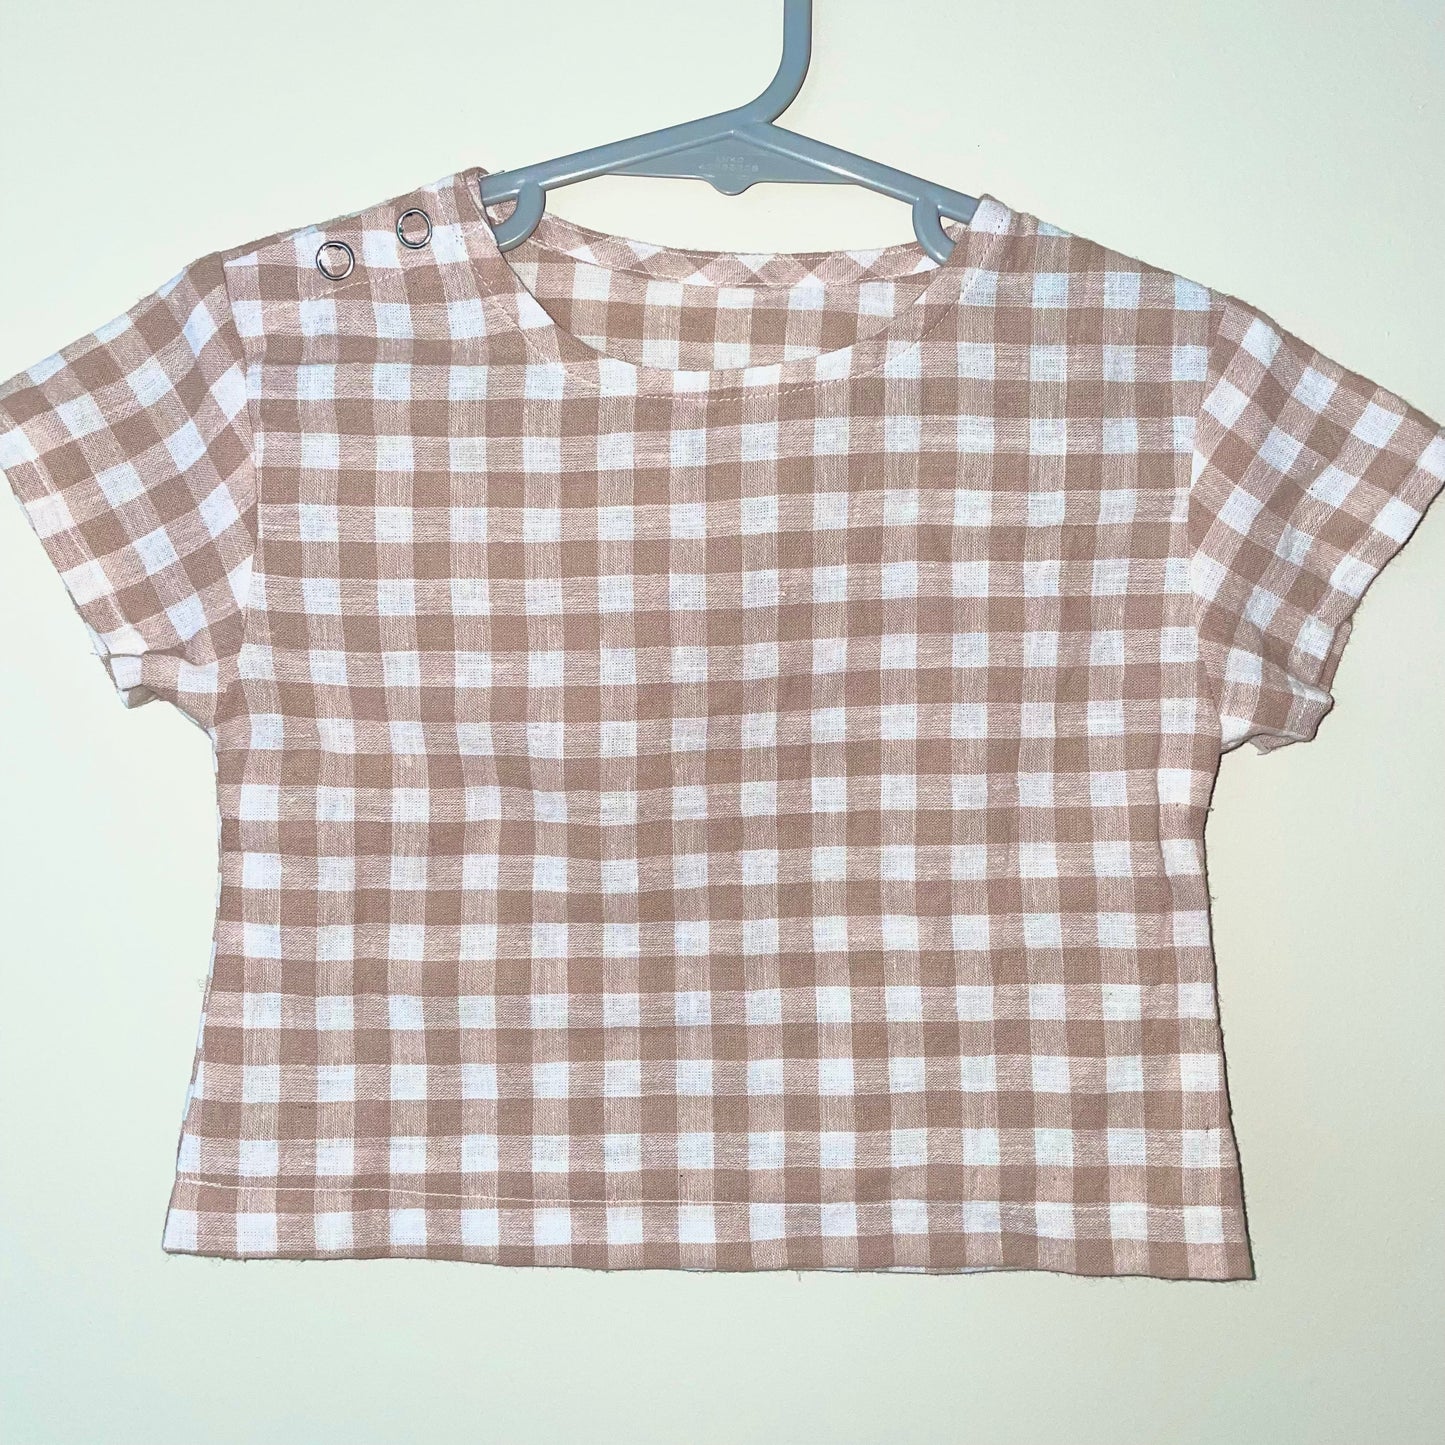 Cotton tee | dusty rose gingham